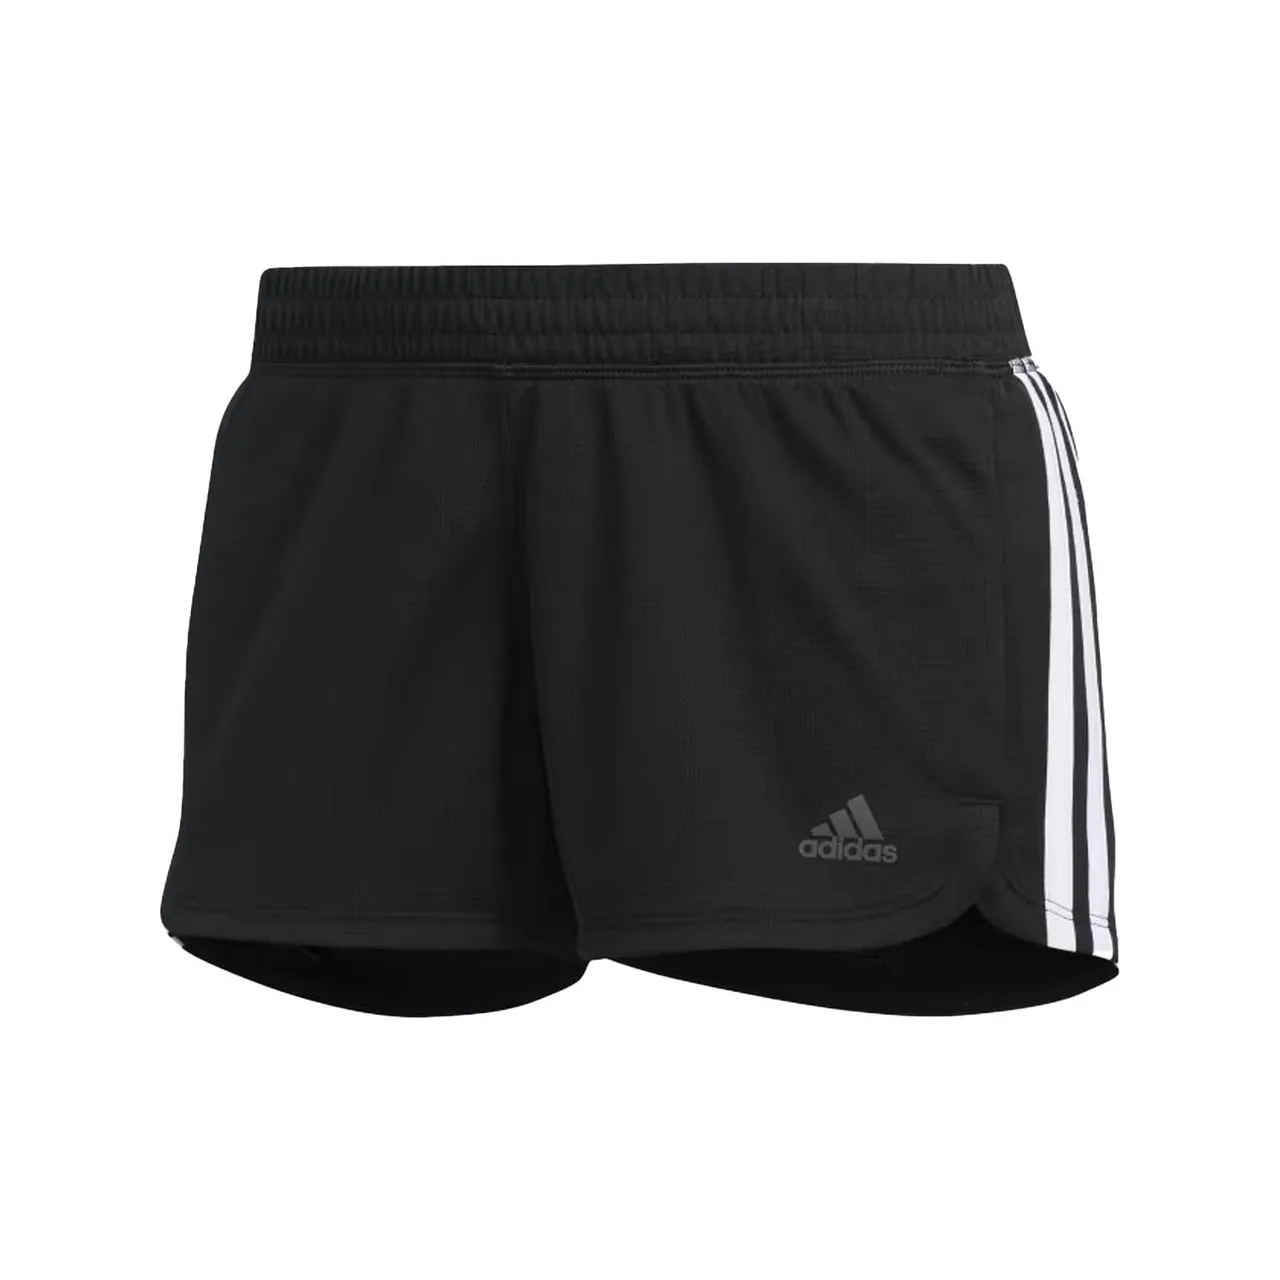 Adidas Pacer 3 Stripes Knit Short